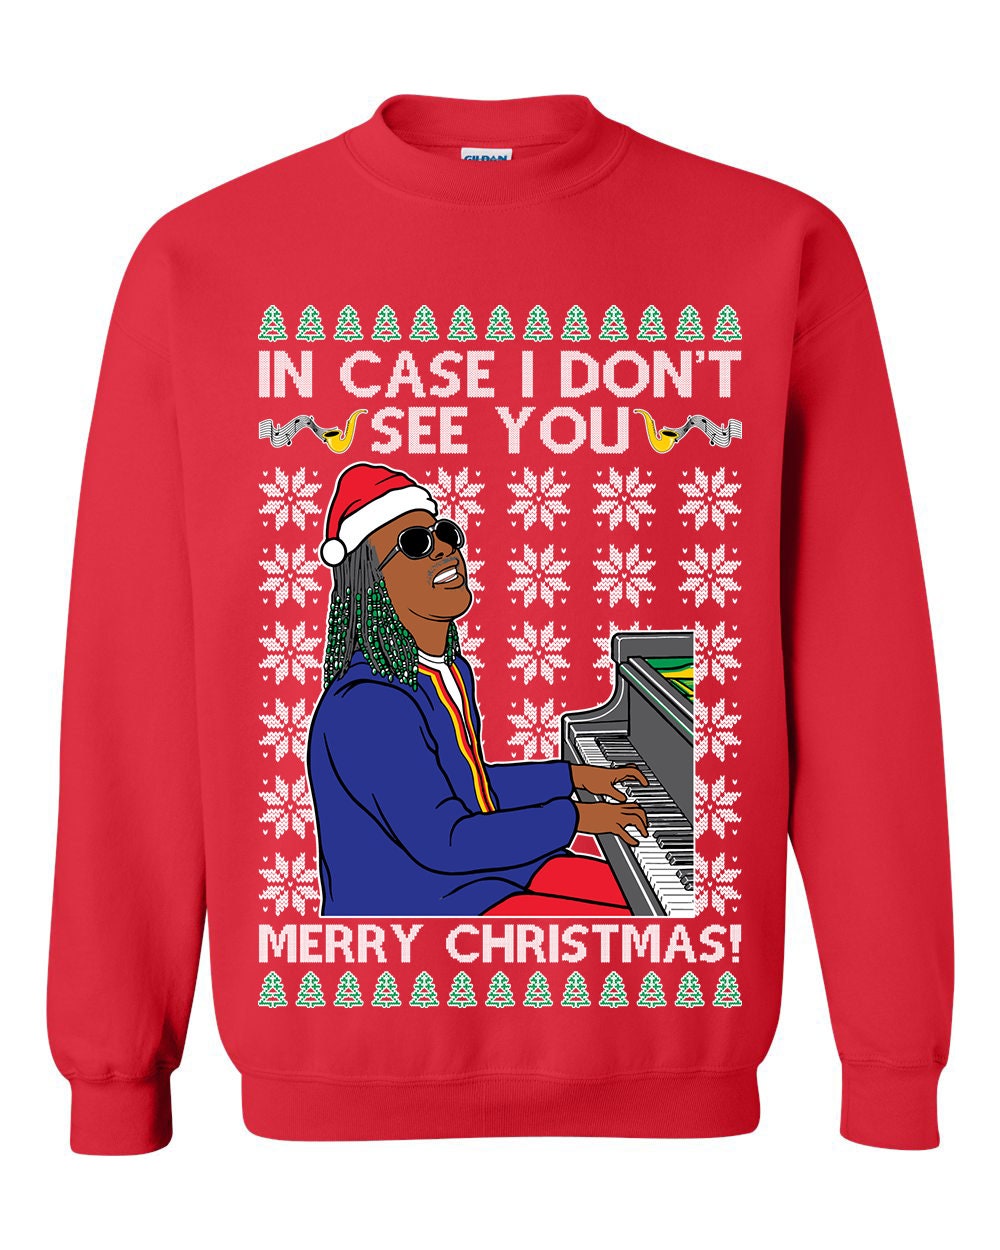 Discover In Case I Don't See You Merry Christmas Ugly Christmas Sweater